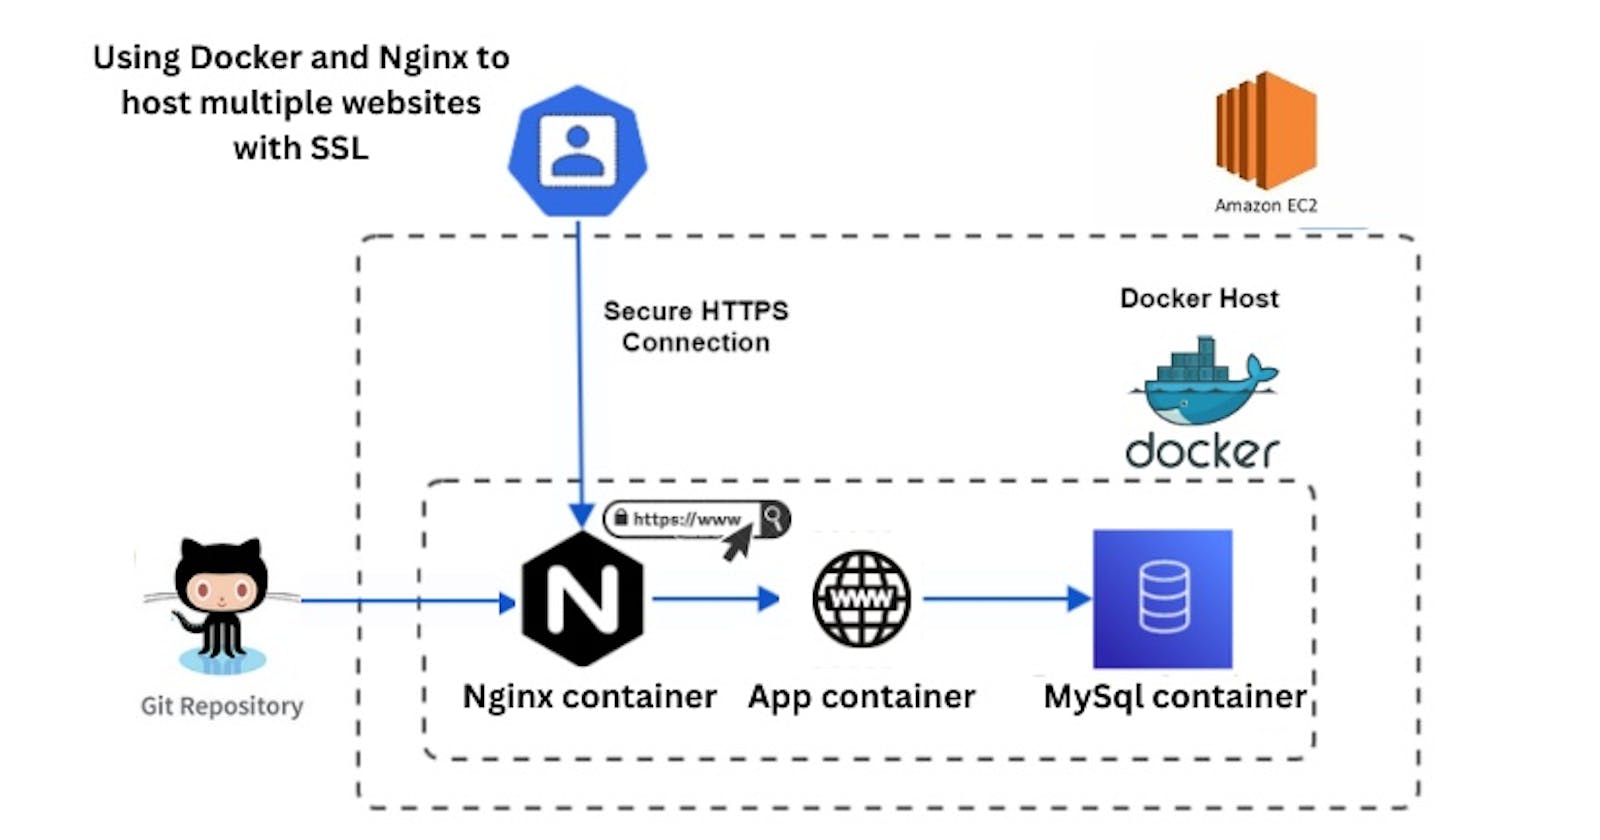 Deploy Your Application and Secure Your Domains for Free with Let's Encrypt on Docker-Compose and Nginx